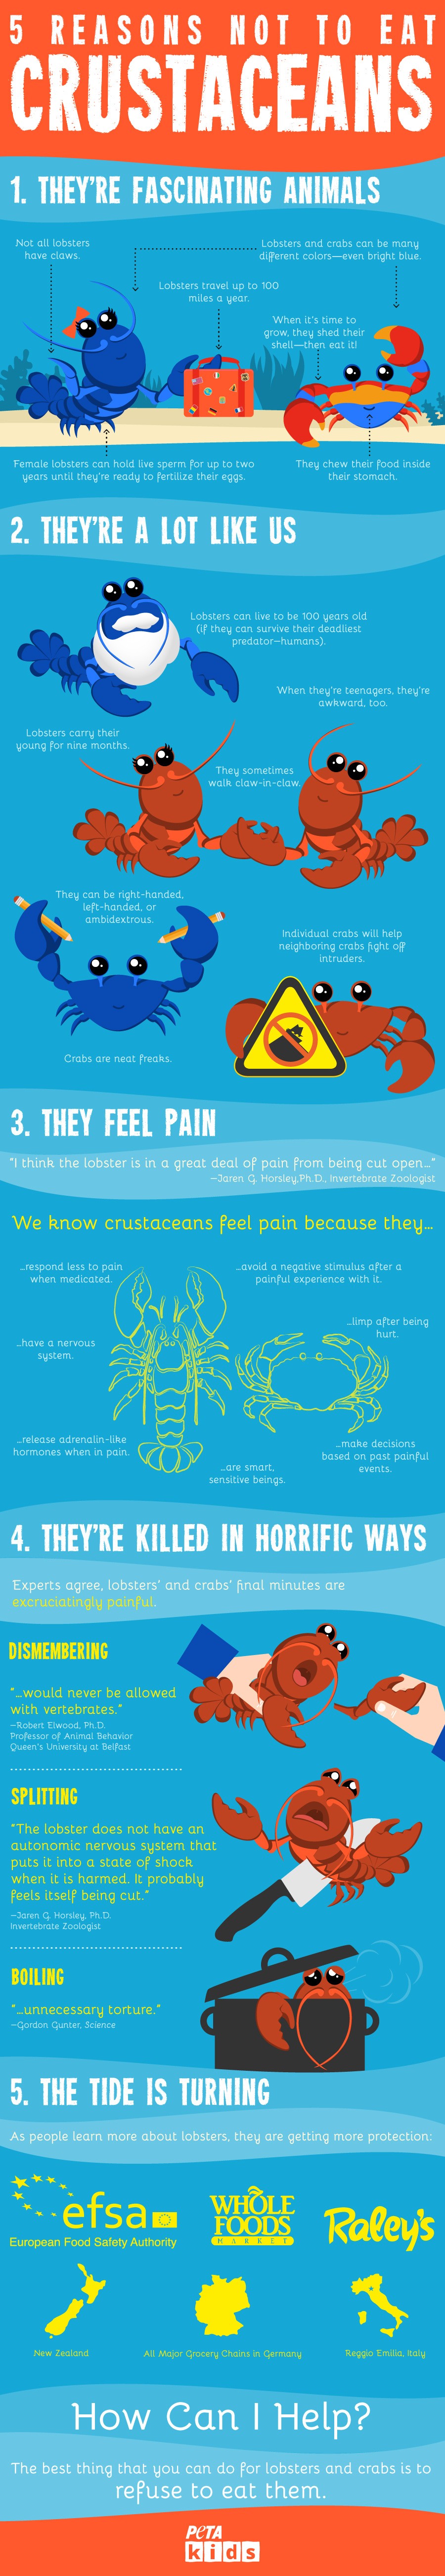 5 Reasons Not to Eat Crustaceans Infographic